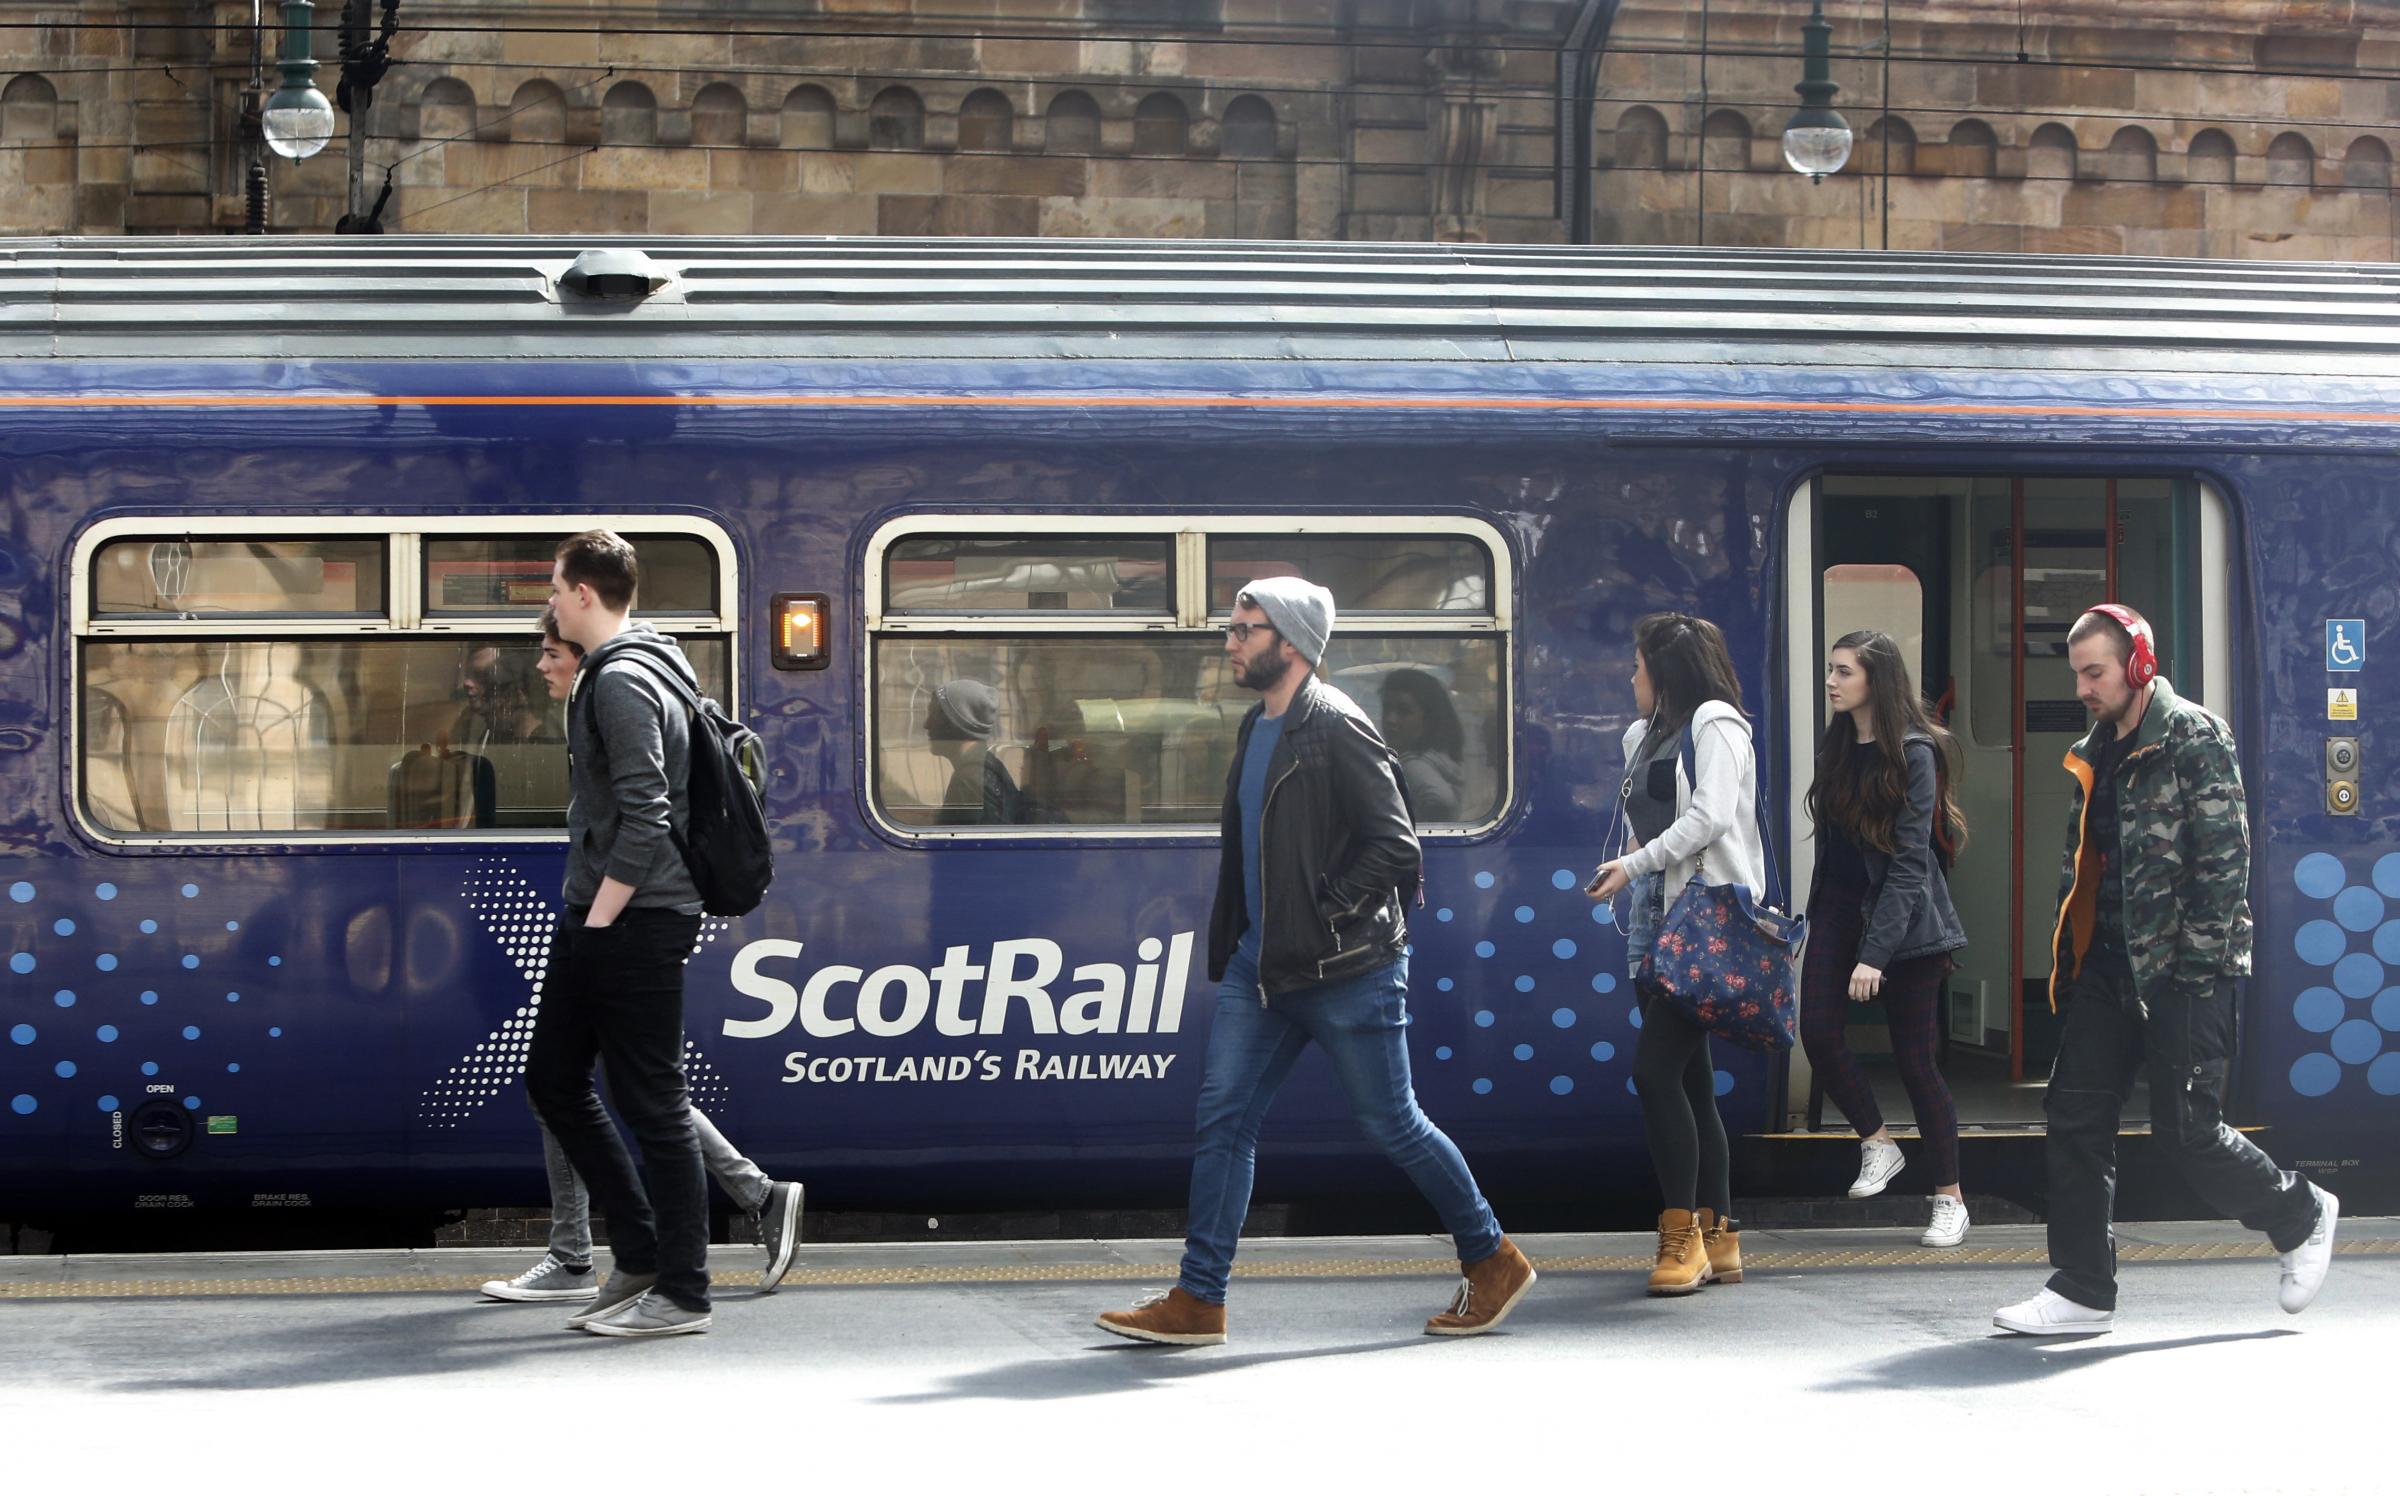 ScotRail says demand has fallen by 90 per cent year-on-year as a result of the pandemic